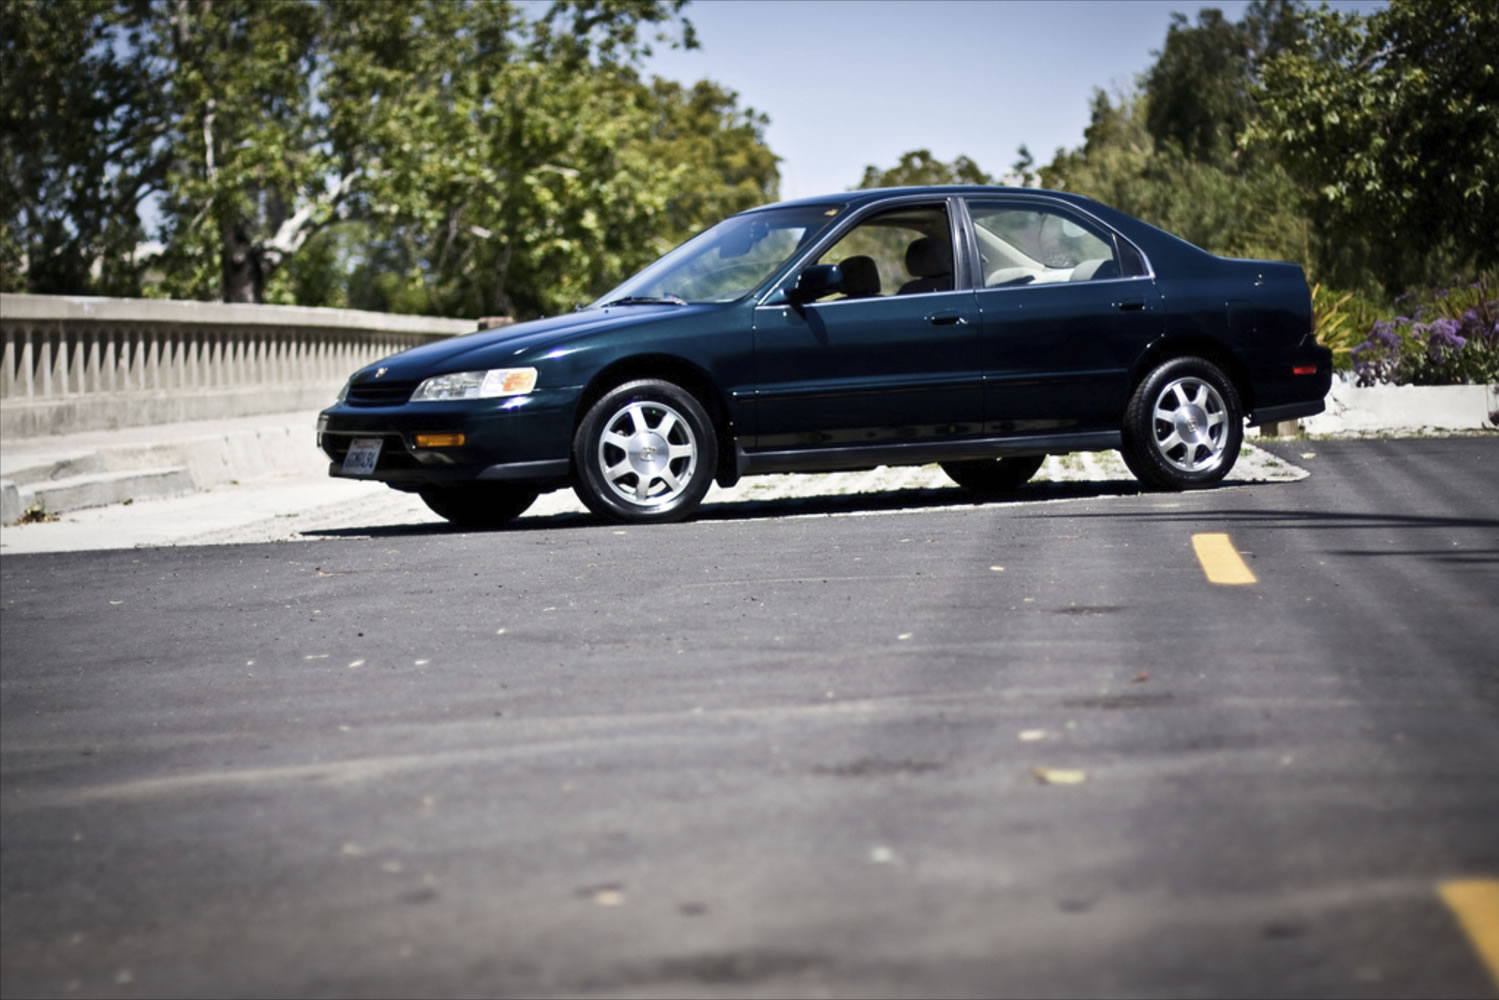 The 1995 Honda Accord is eighth on the 2011 list of the 10 most-stolen vehicles in Clark County.